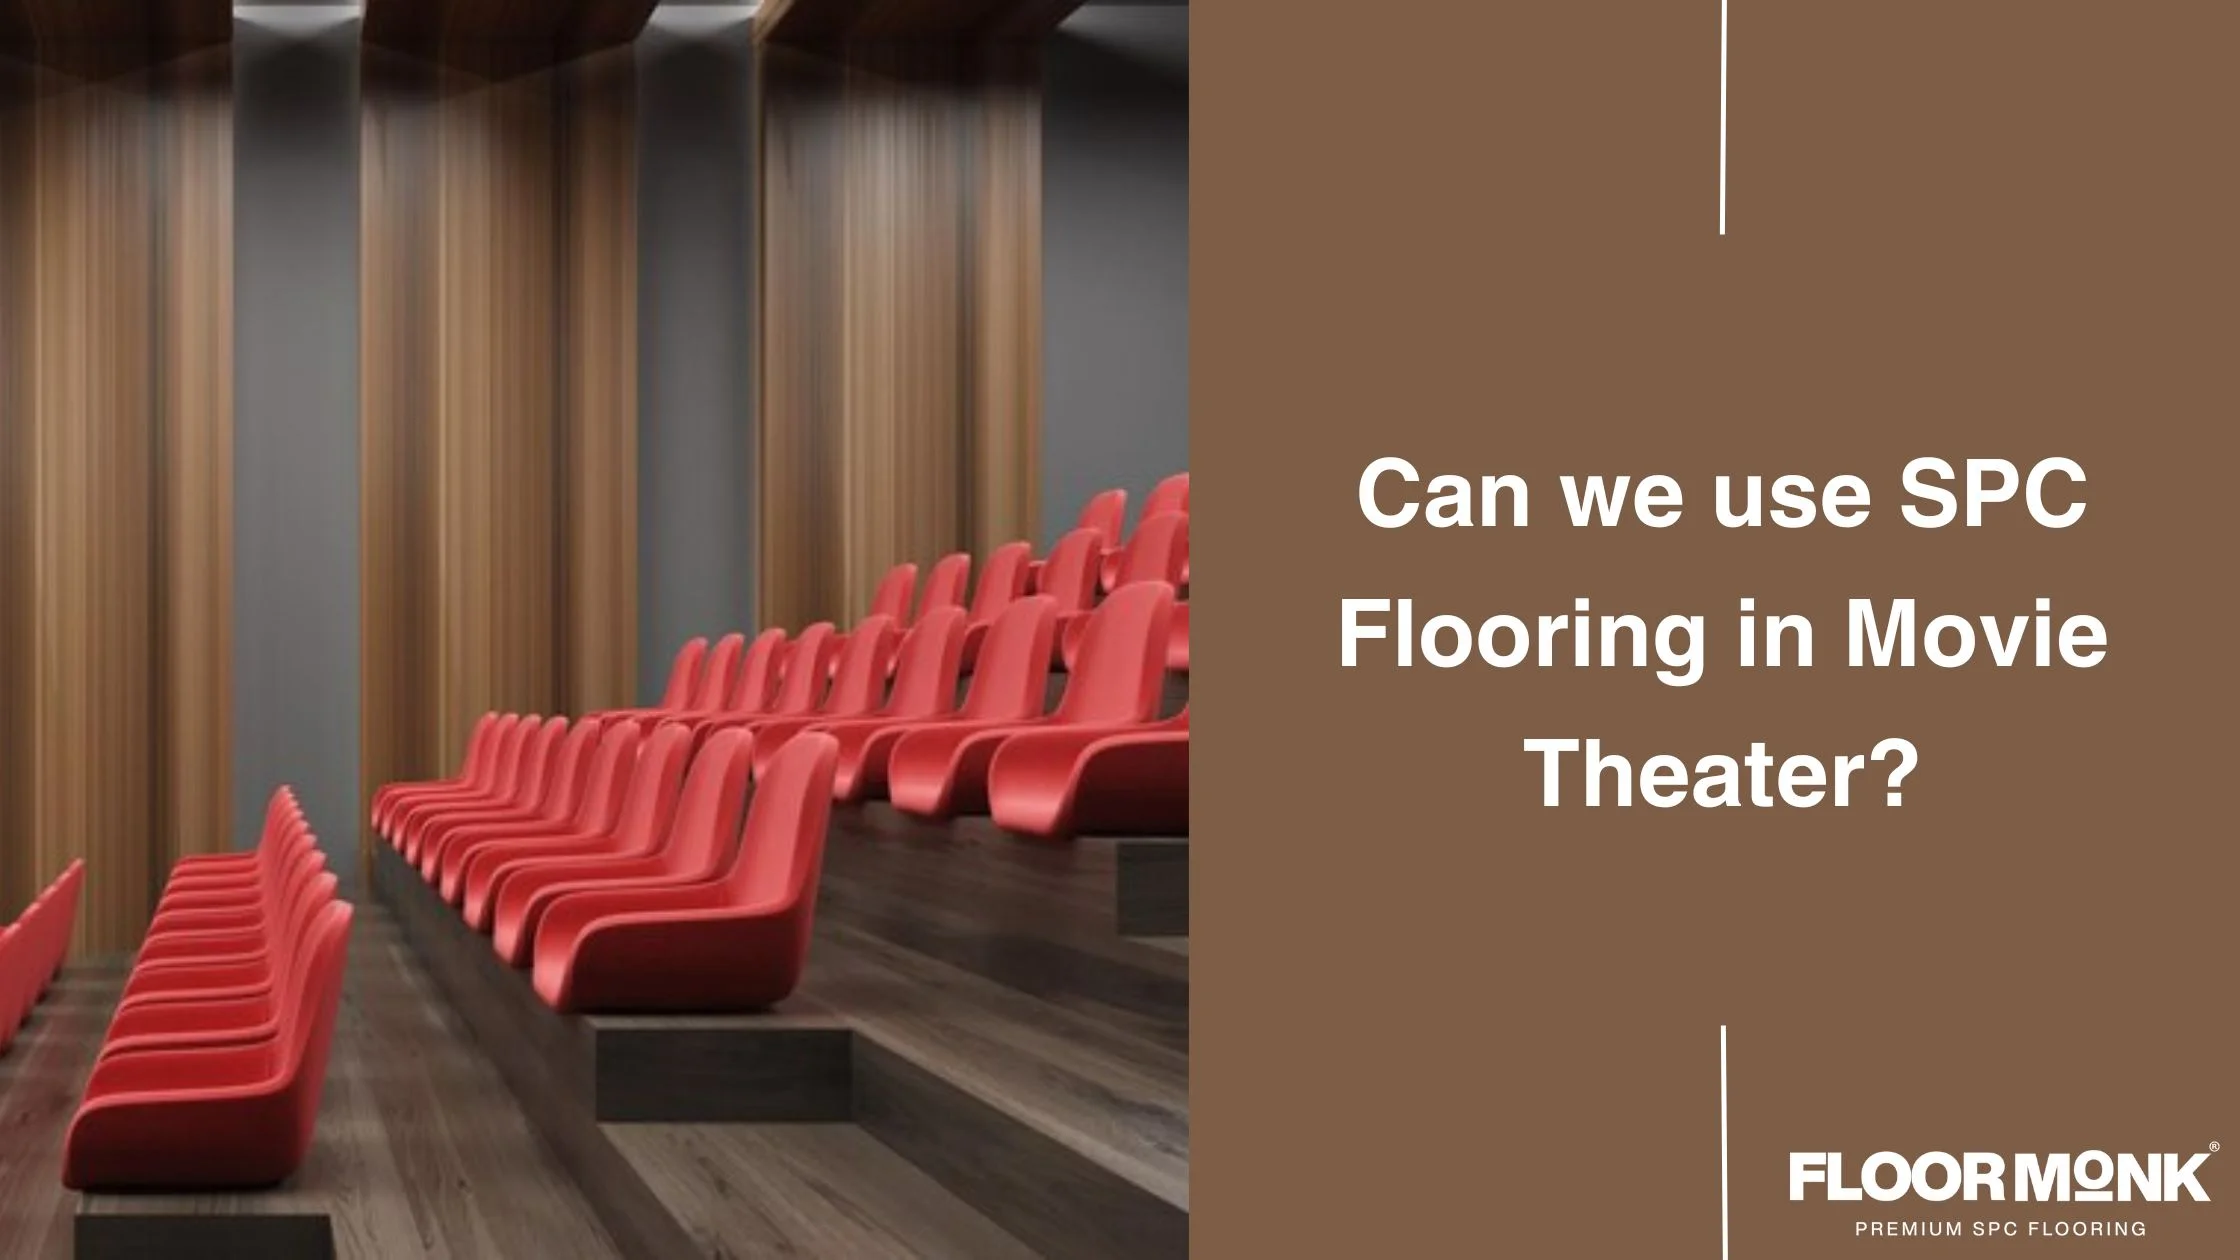 Can We Use SPC Flooring In Movie Theater?